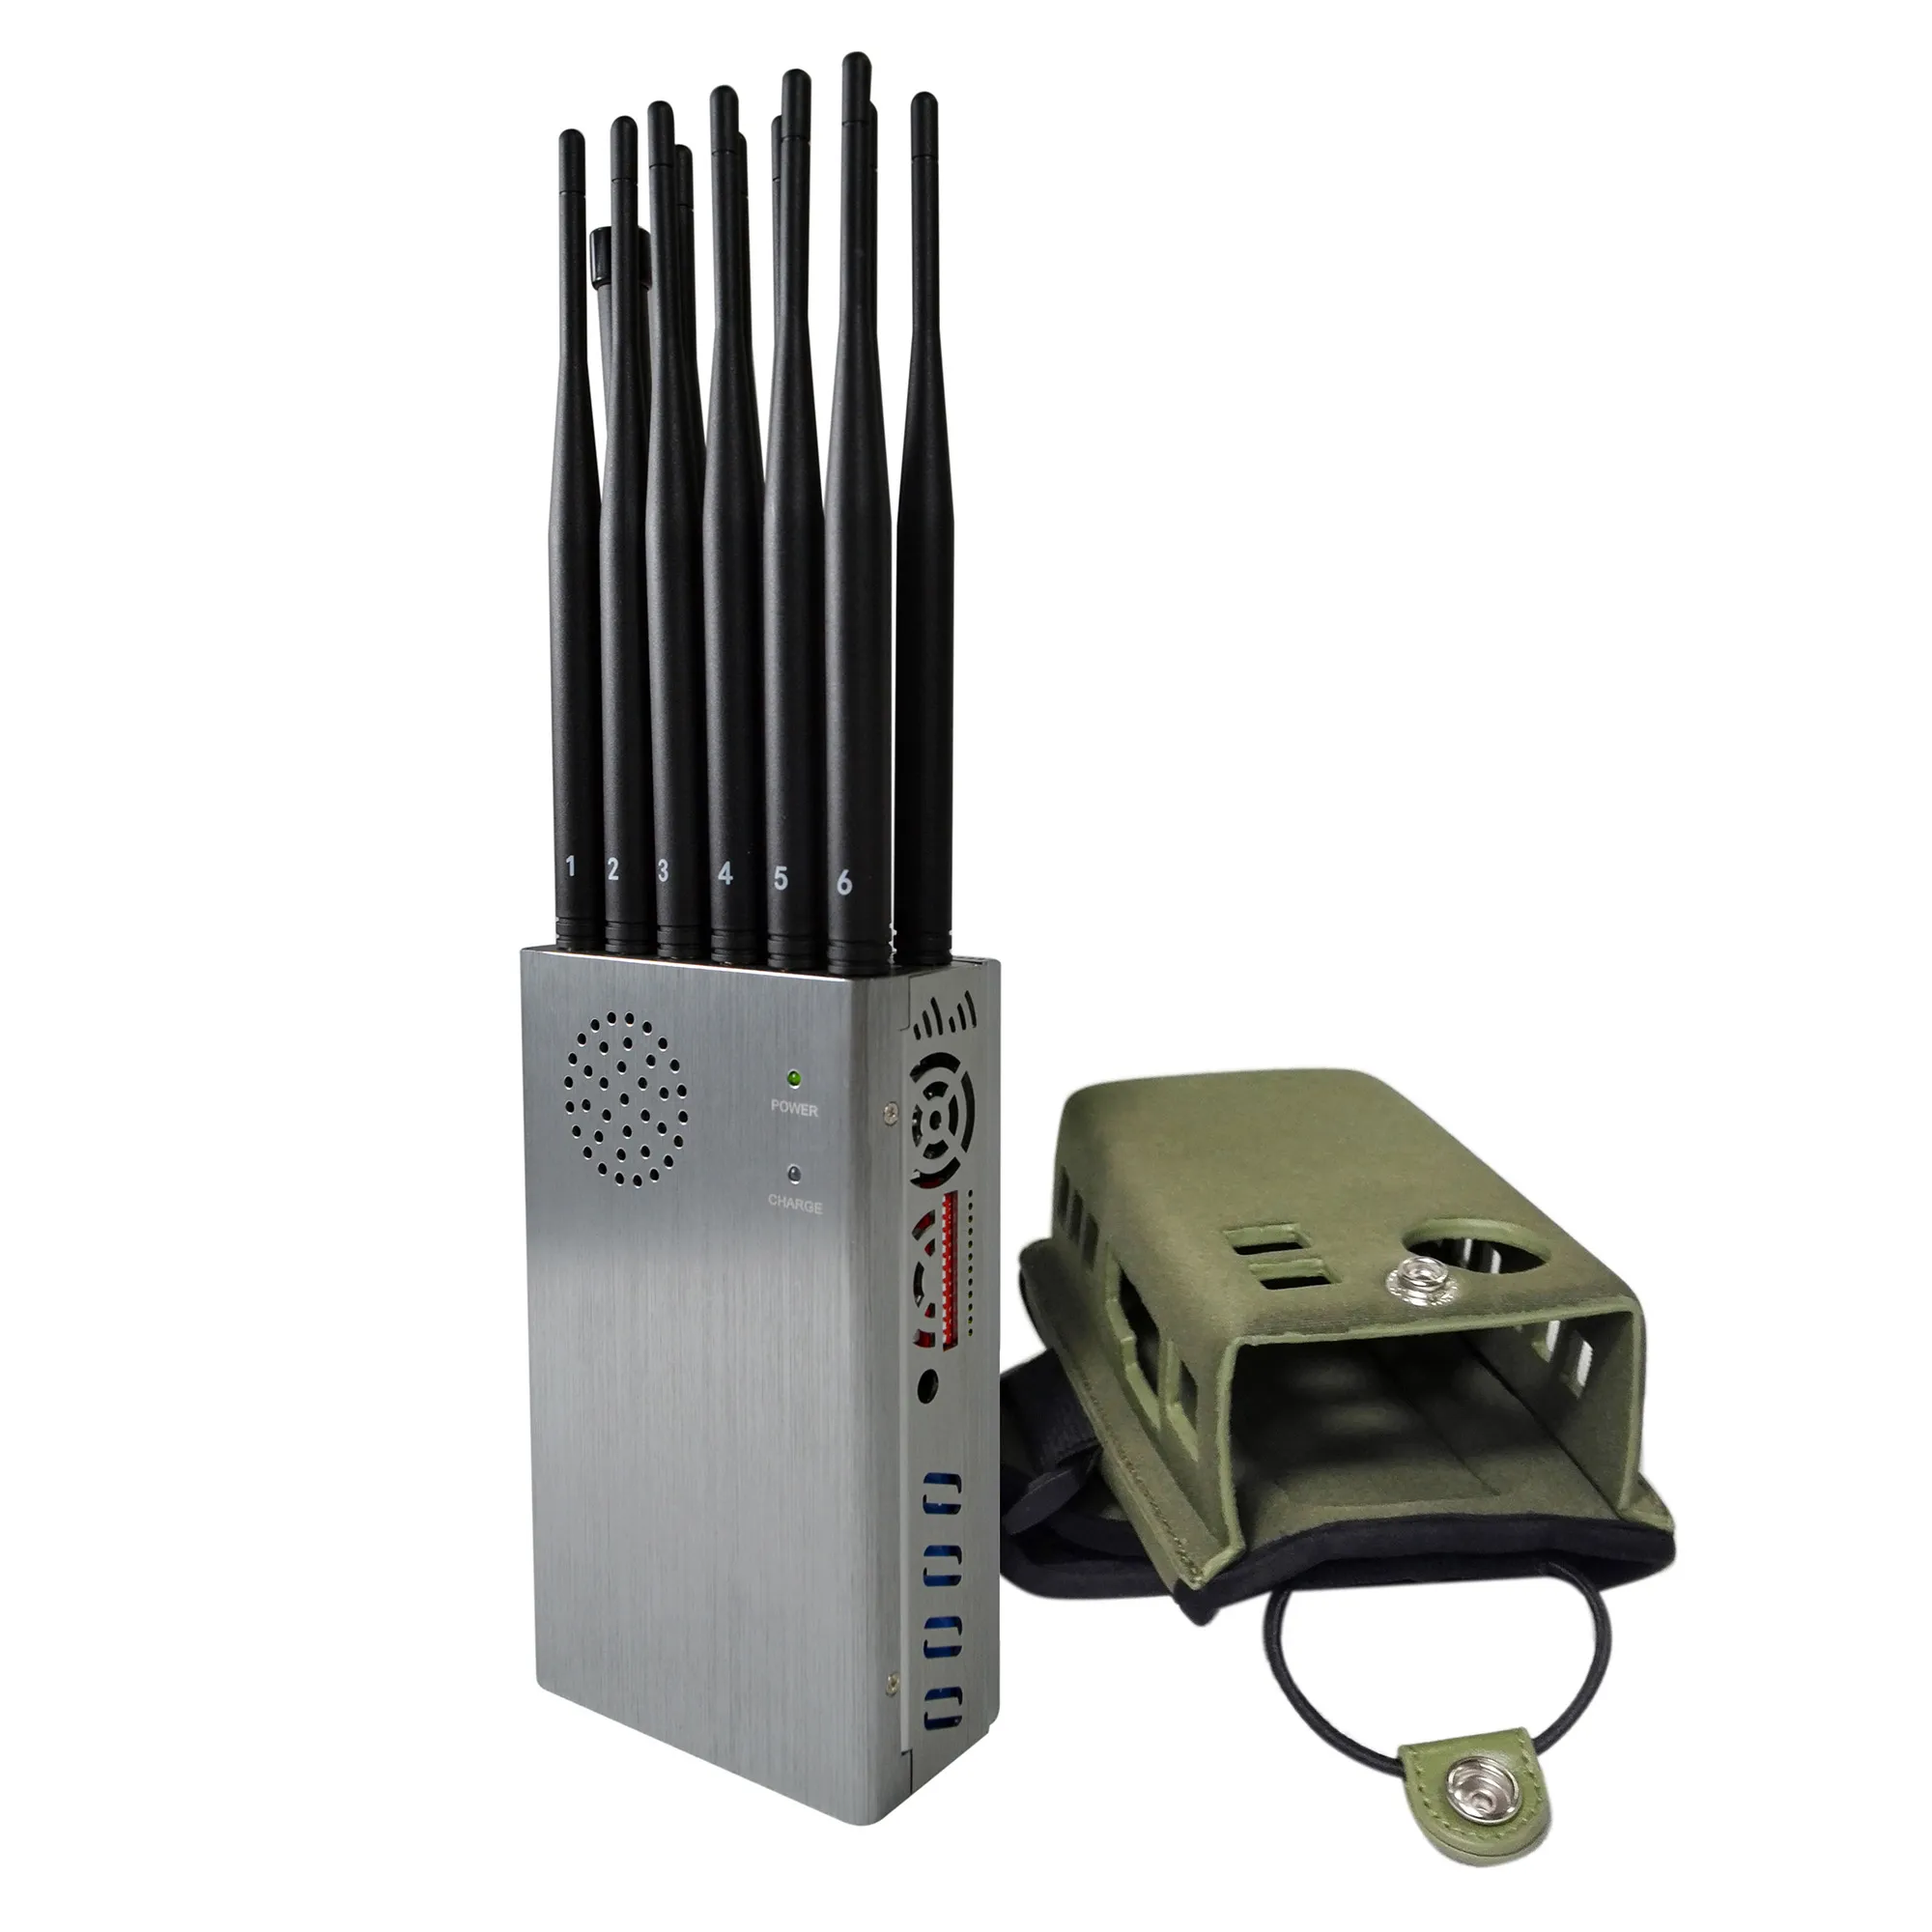 What Is A Signal Jammer Device And How It Works? - GSM, CDMA, DCS, PHS, 3G,  4G, Wifi & Bluetooth Signals